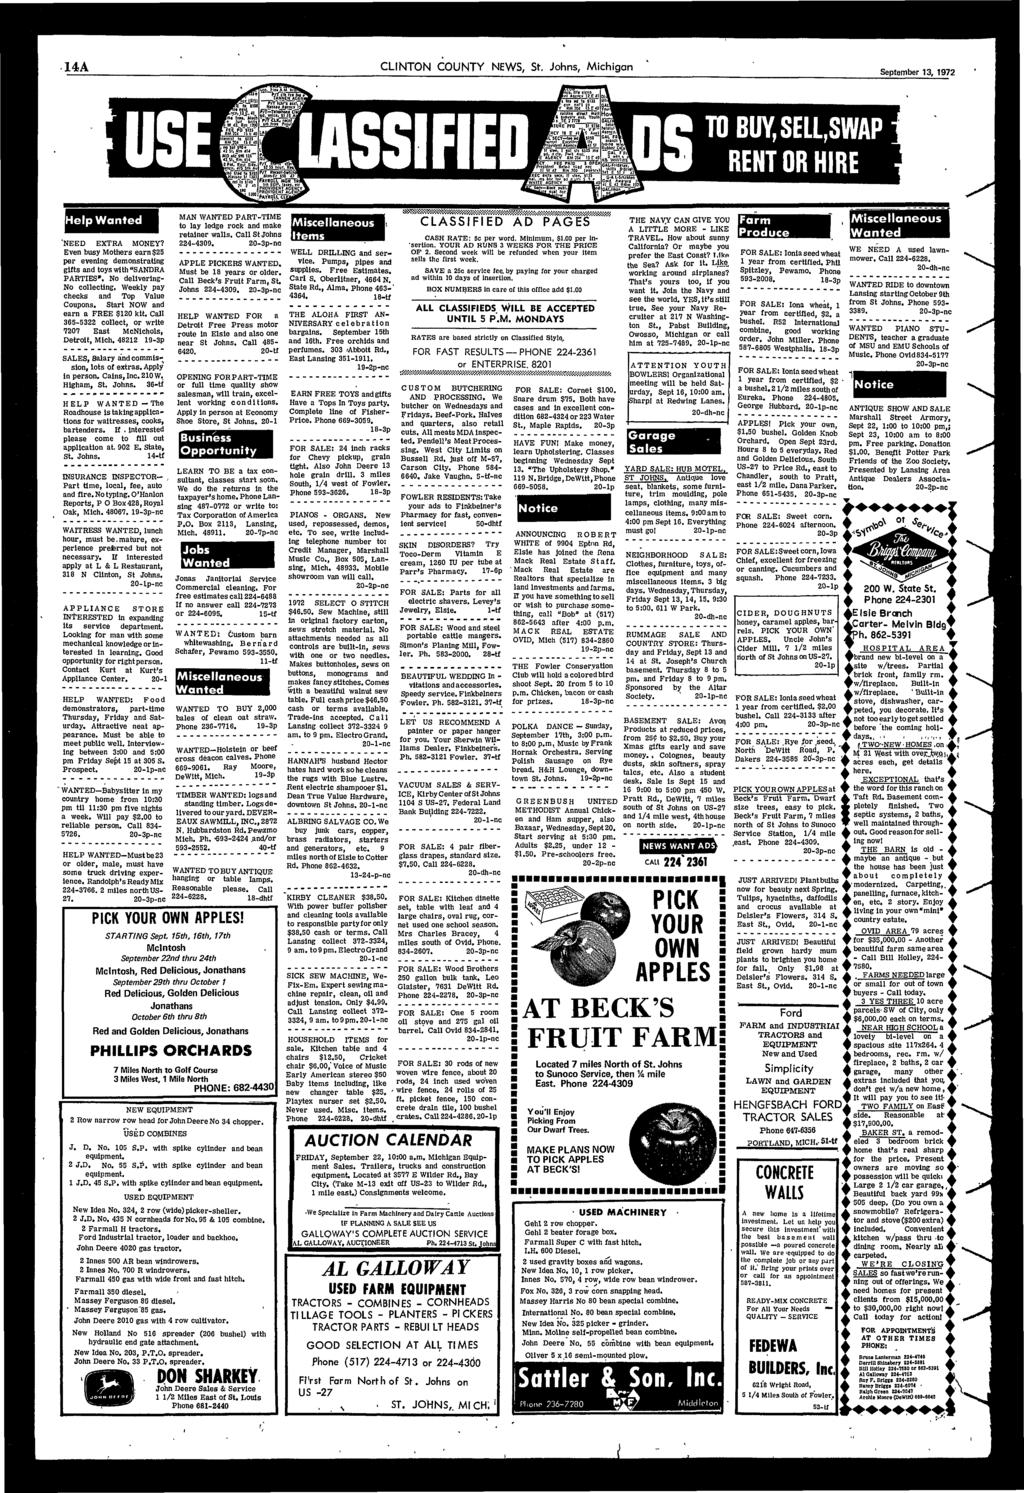 14A CLINTON COUNTY NEWS, St. Johns, Michigan September 13, 1972 elp Wanted 'NEED EXTRA MONEY? Even busy Mothers earn $25 per evening demonstrating gifts and toys with "SANDRA PARTIES".